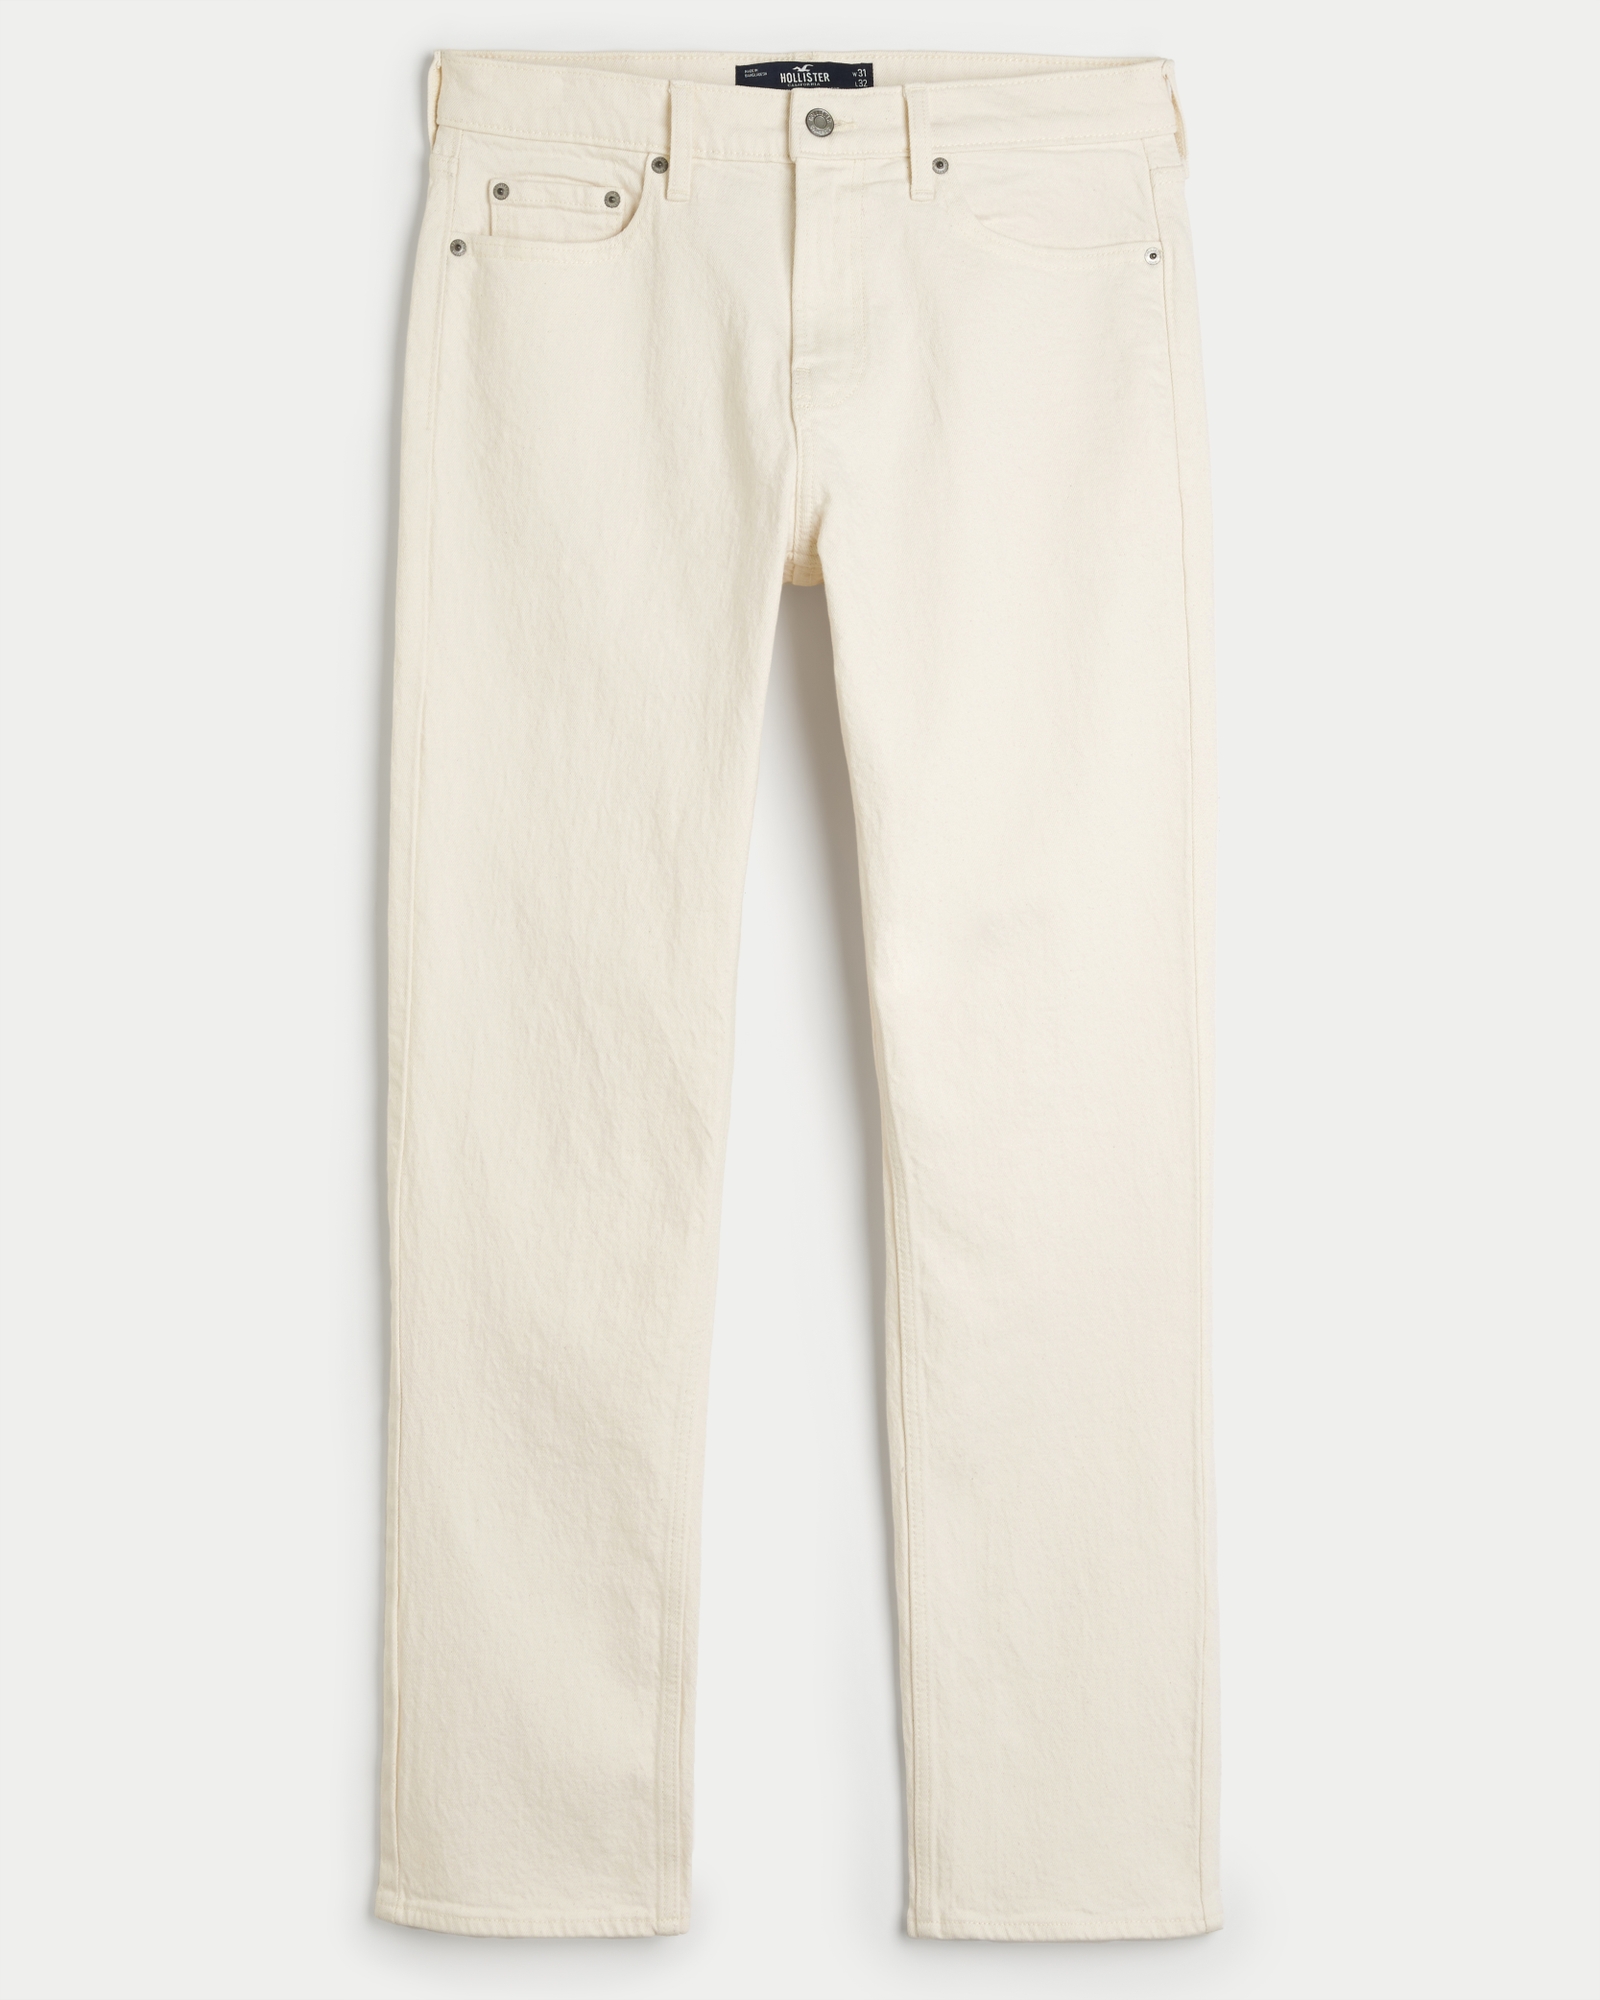 https://img.hollisterco.com/is/image/anf/KIC_331-3187-0010-178_prod1.jpg?policy=product-extra-large